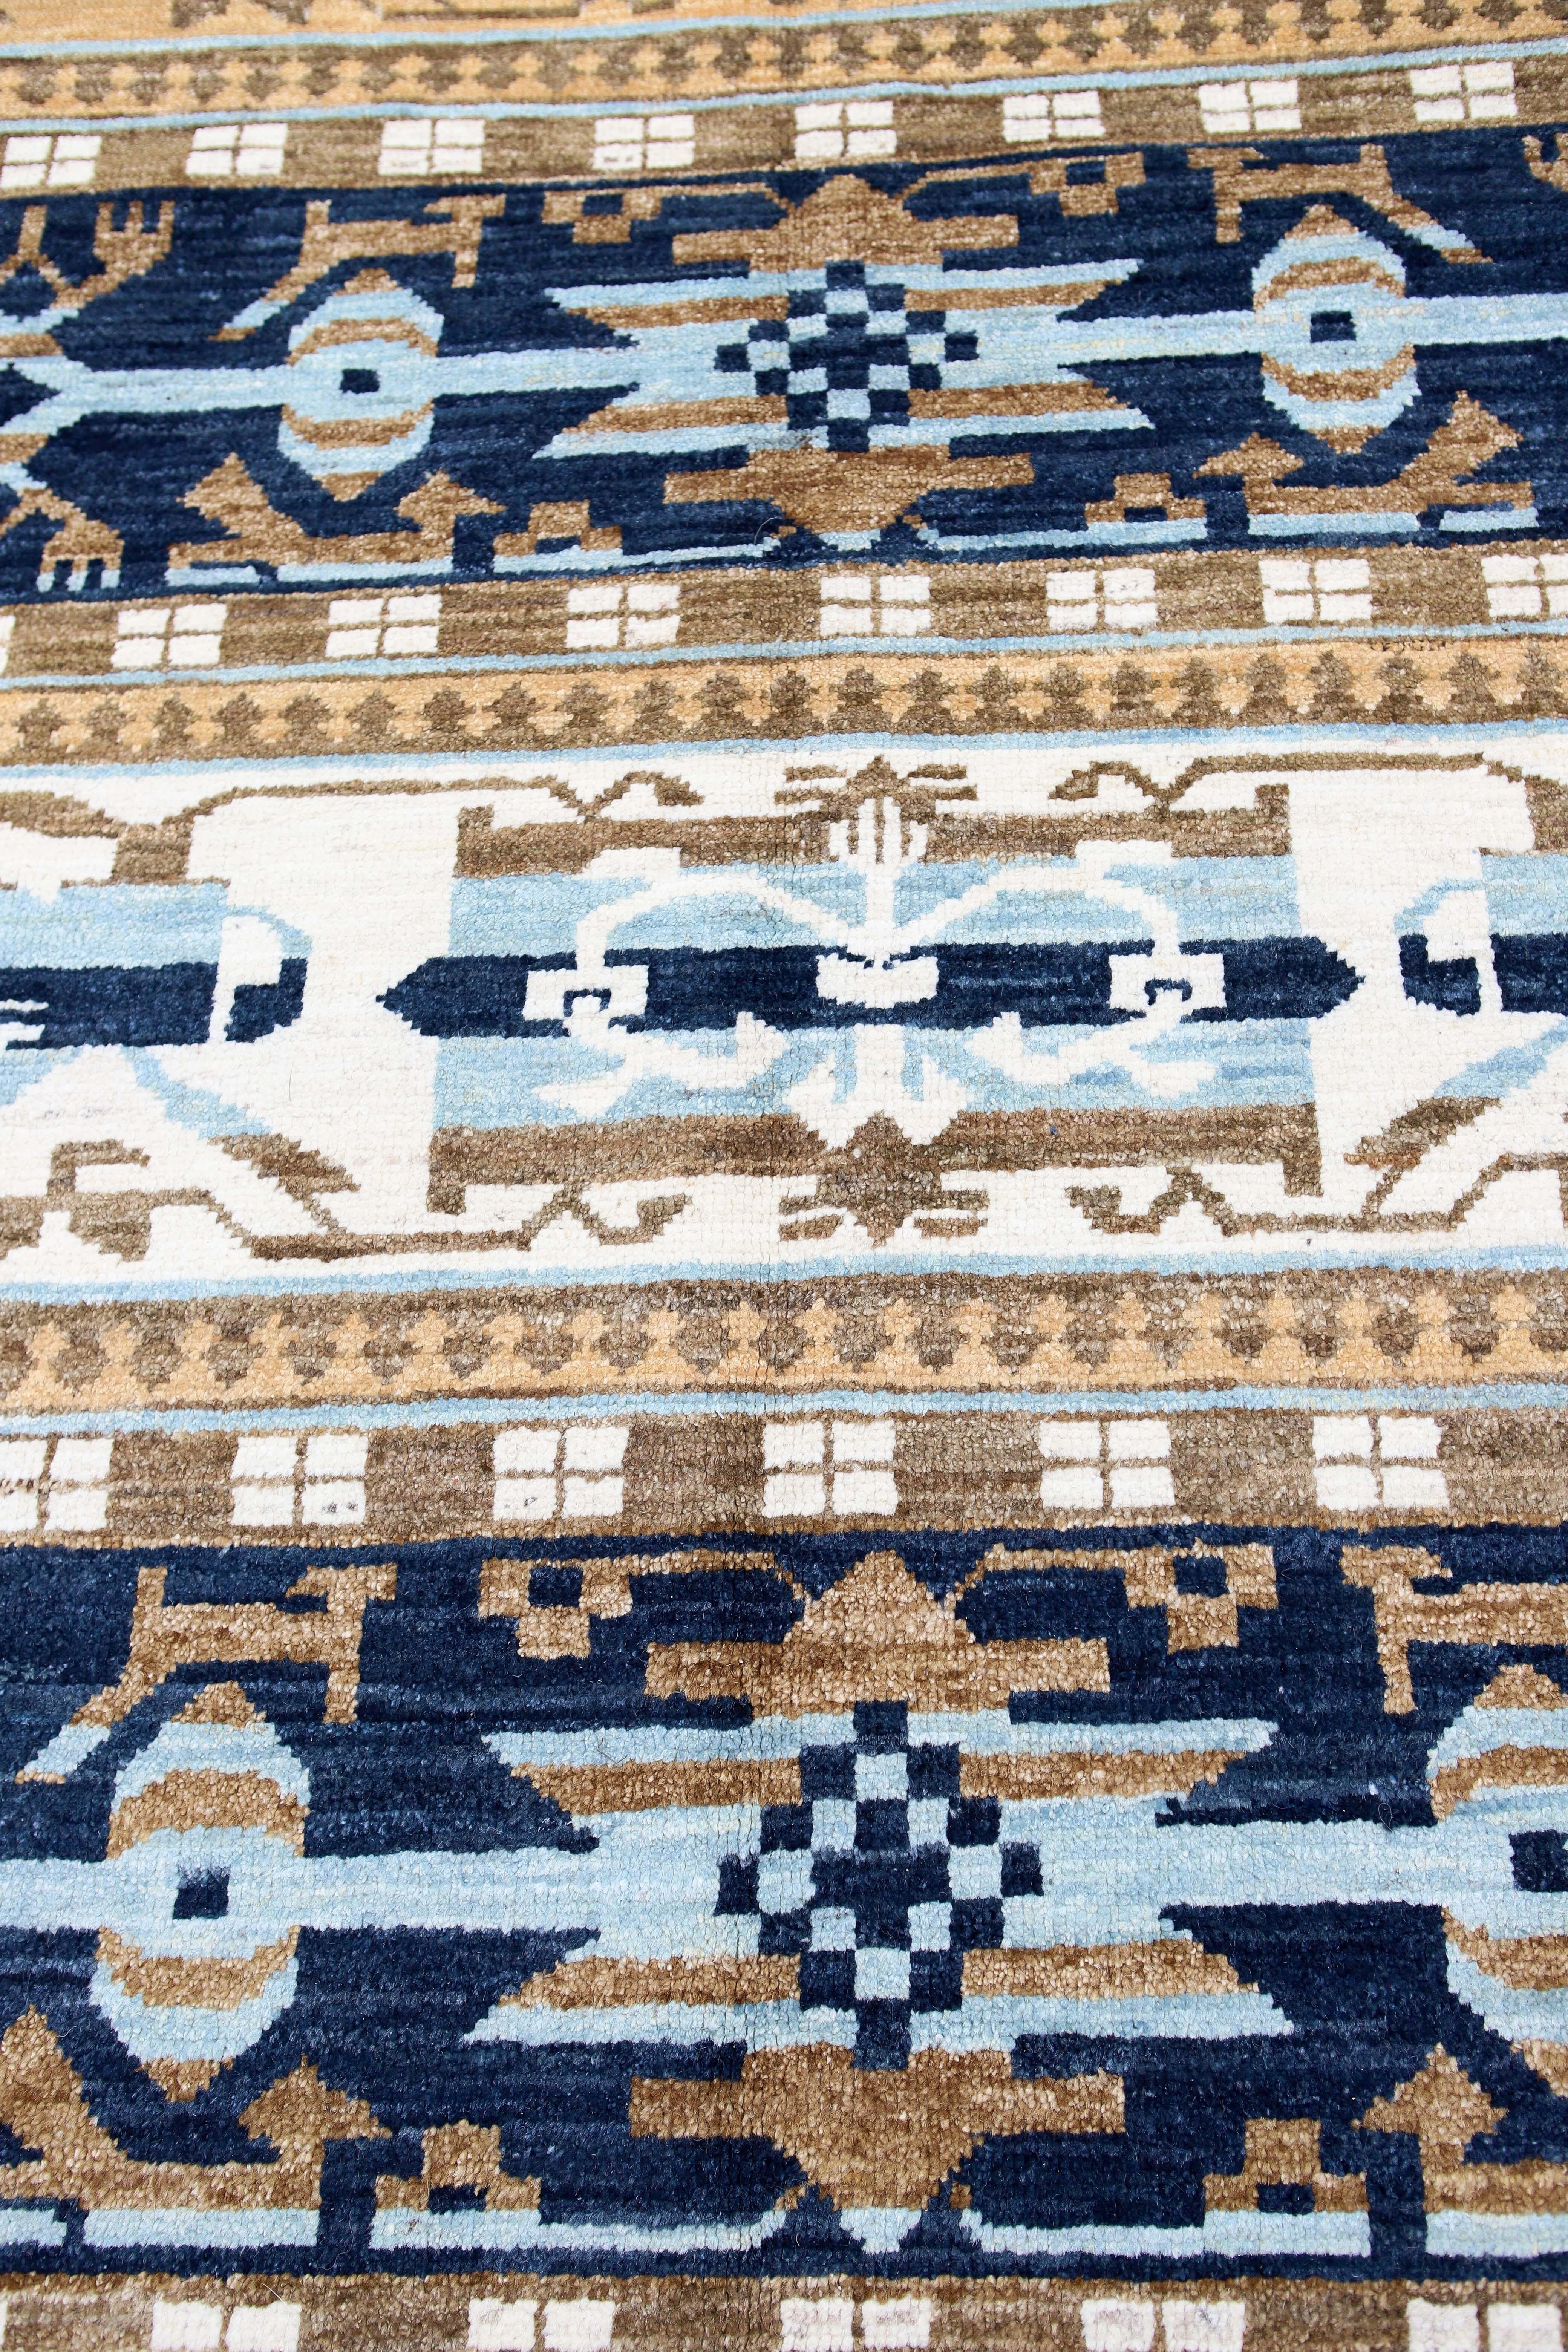 Afghan blue transitional designed 10x14 Rug.
Hand knotted with hand-spun wool, woven in Afghanistan. Measures: 10'4’ x 14